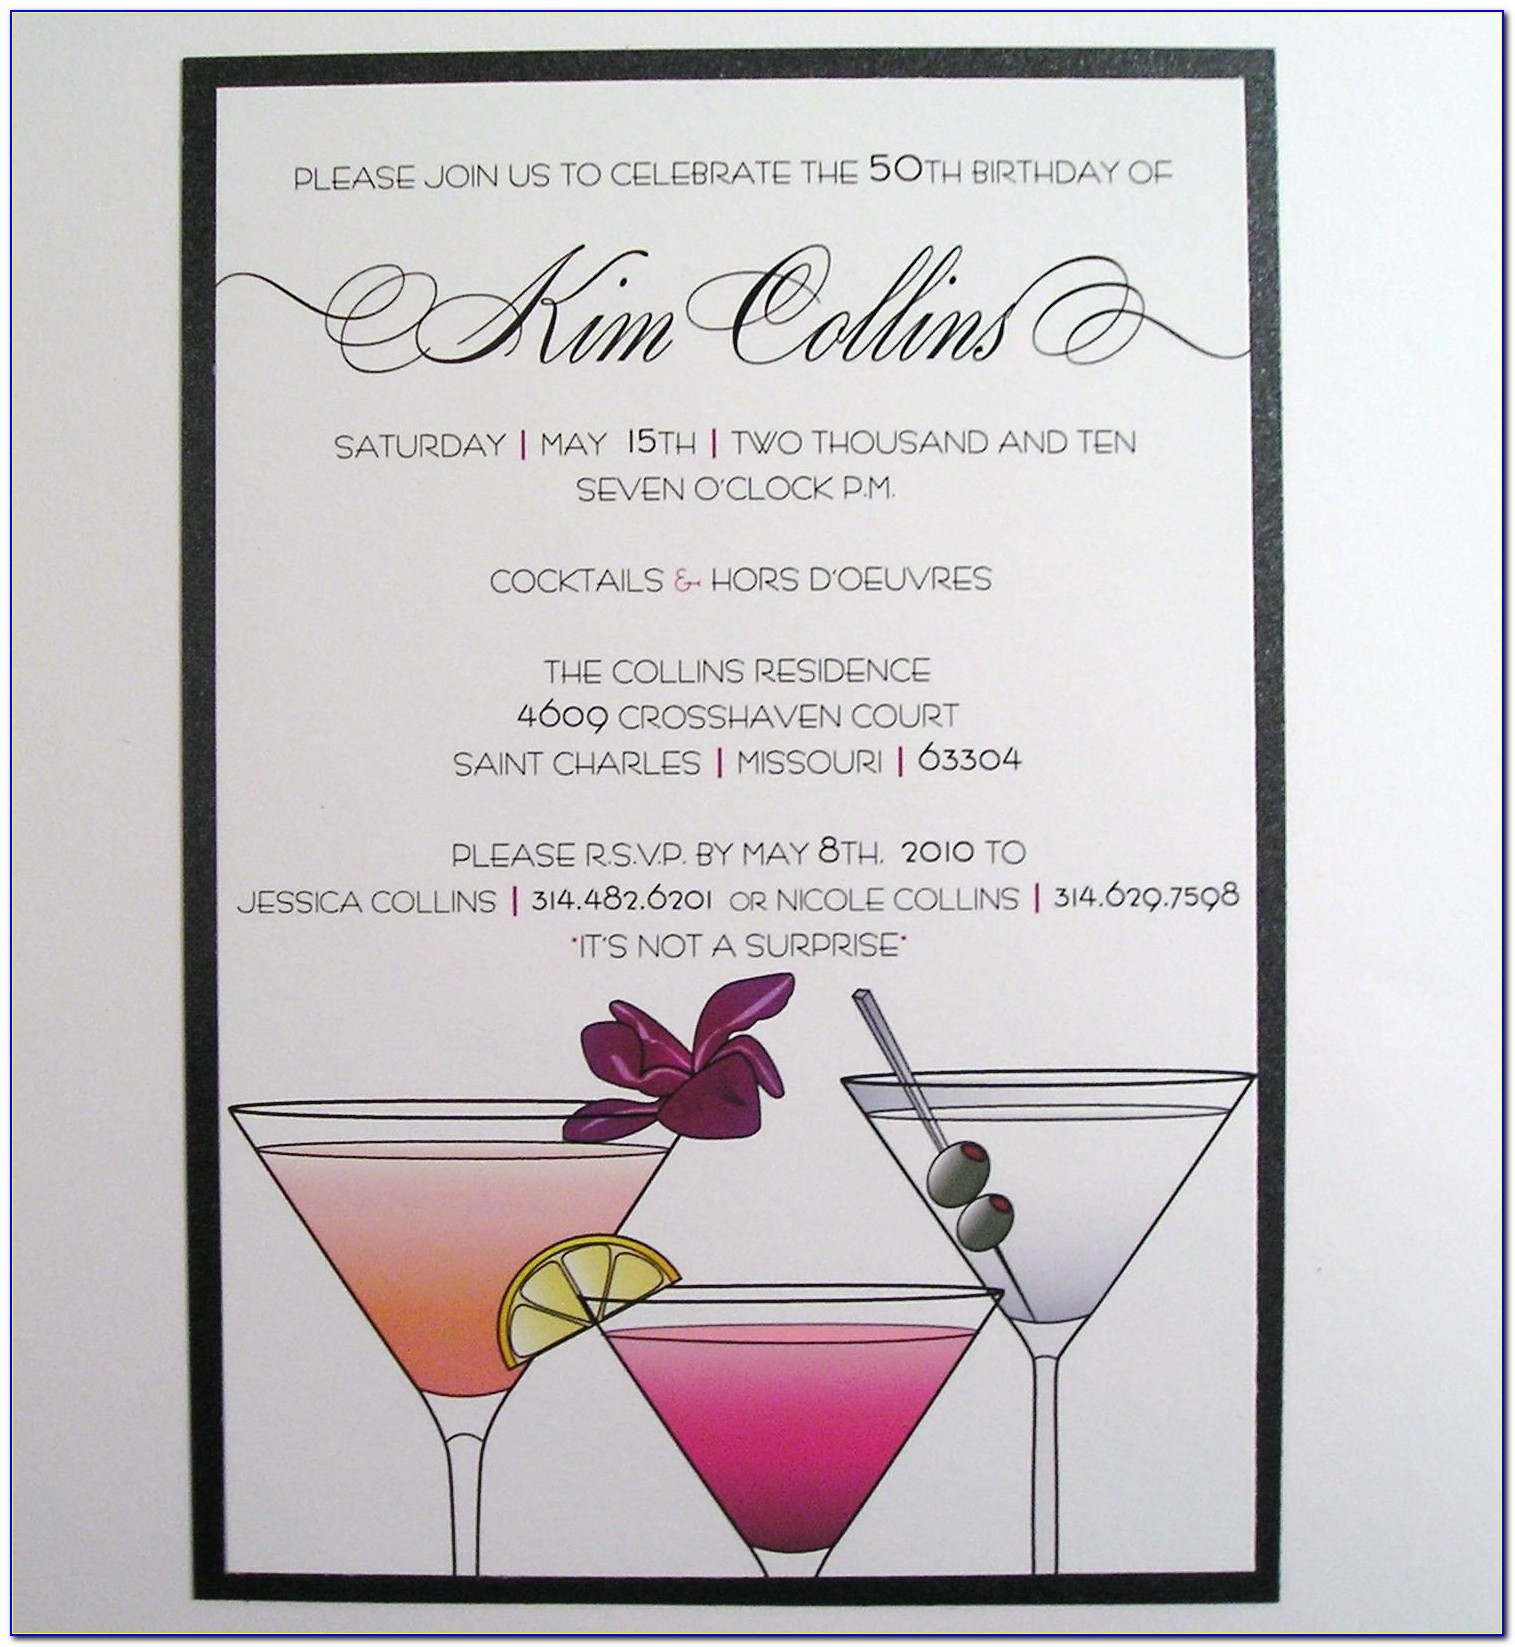 Cocktail Hour Invitation Template